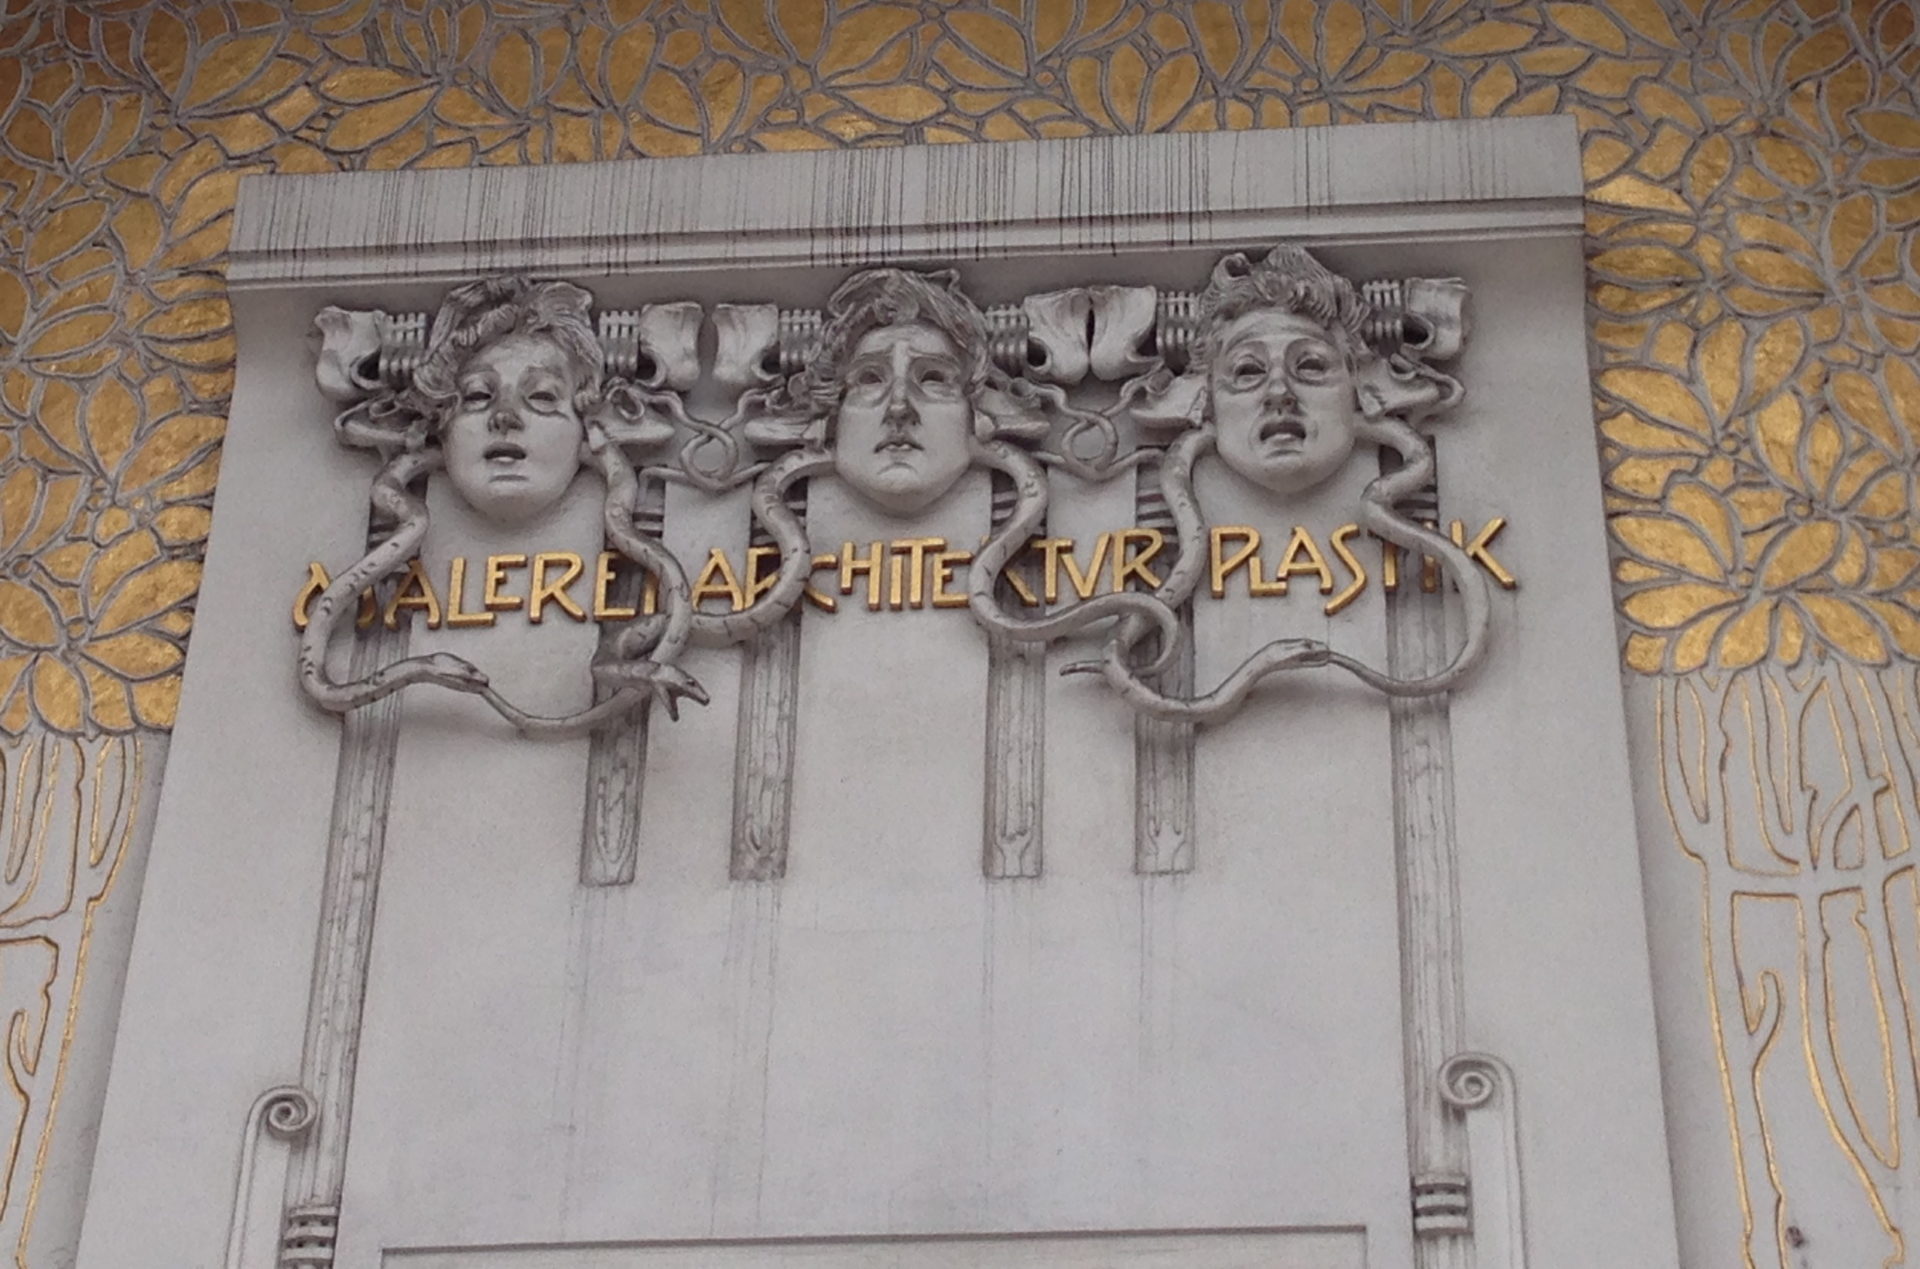 The Secession in Vienna: home to the Beethoven frieze